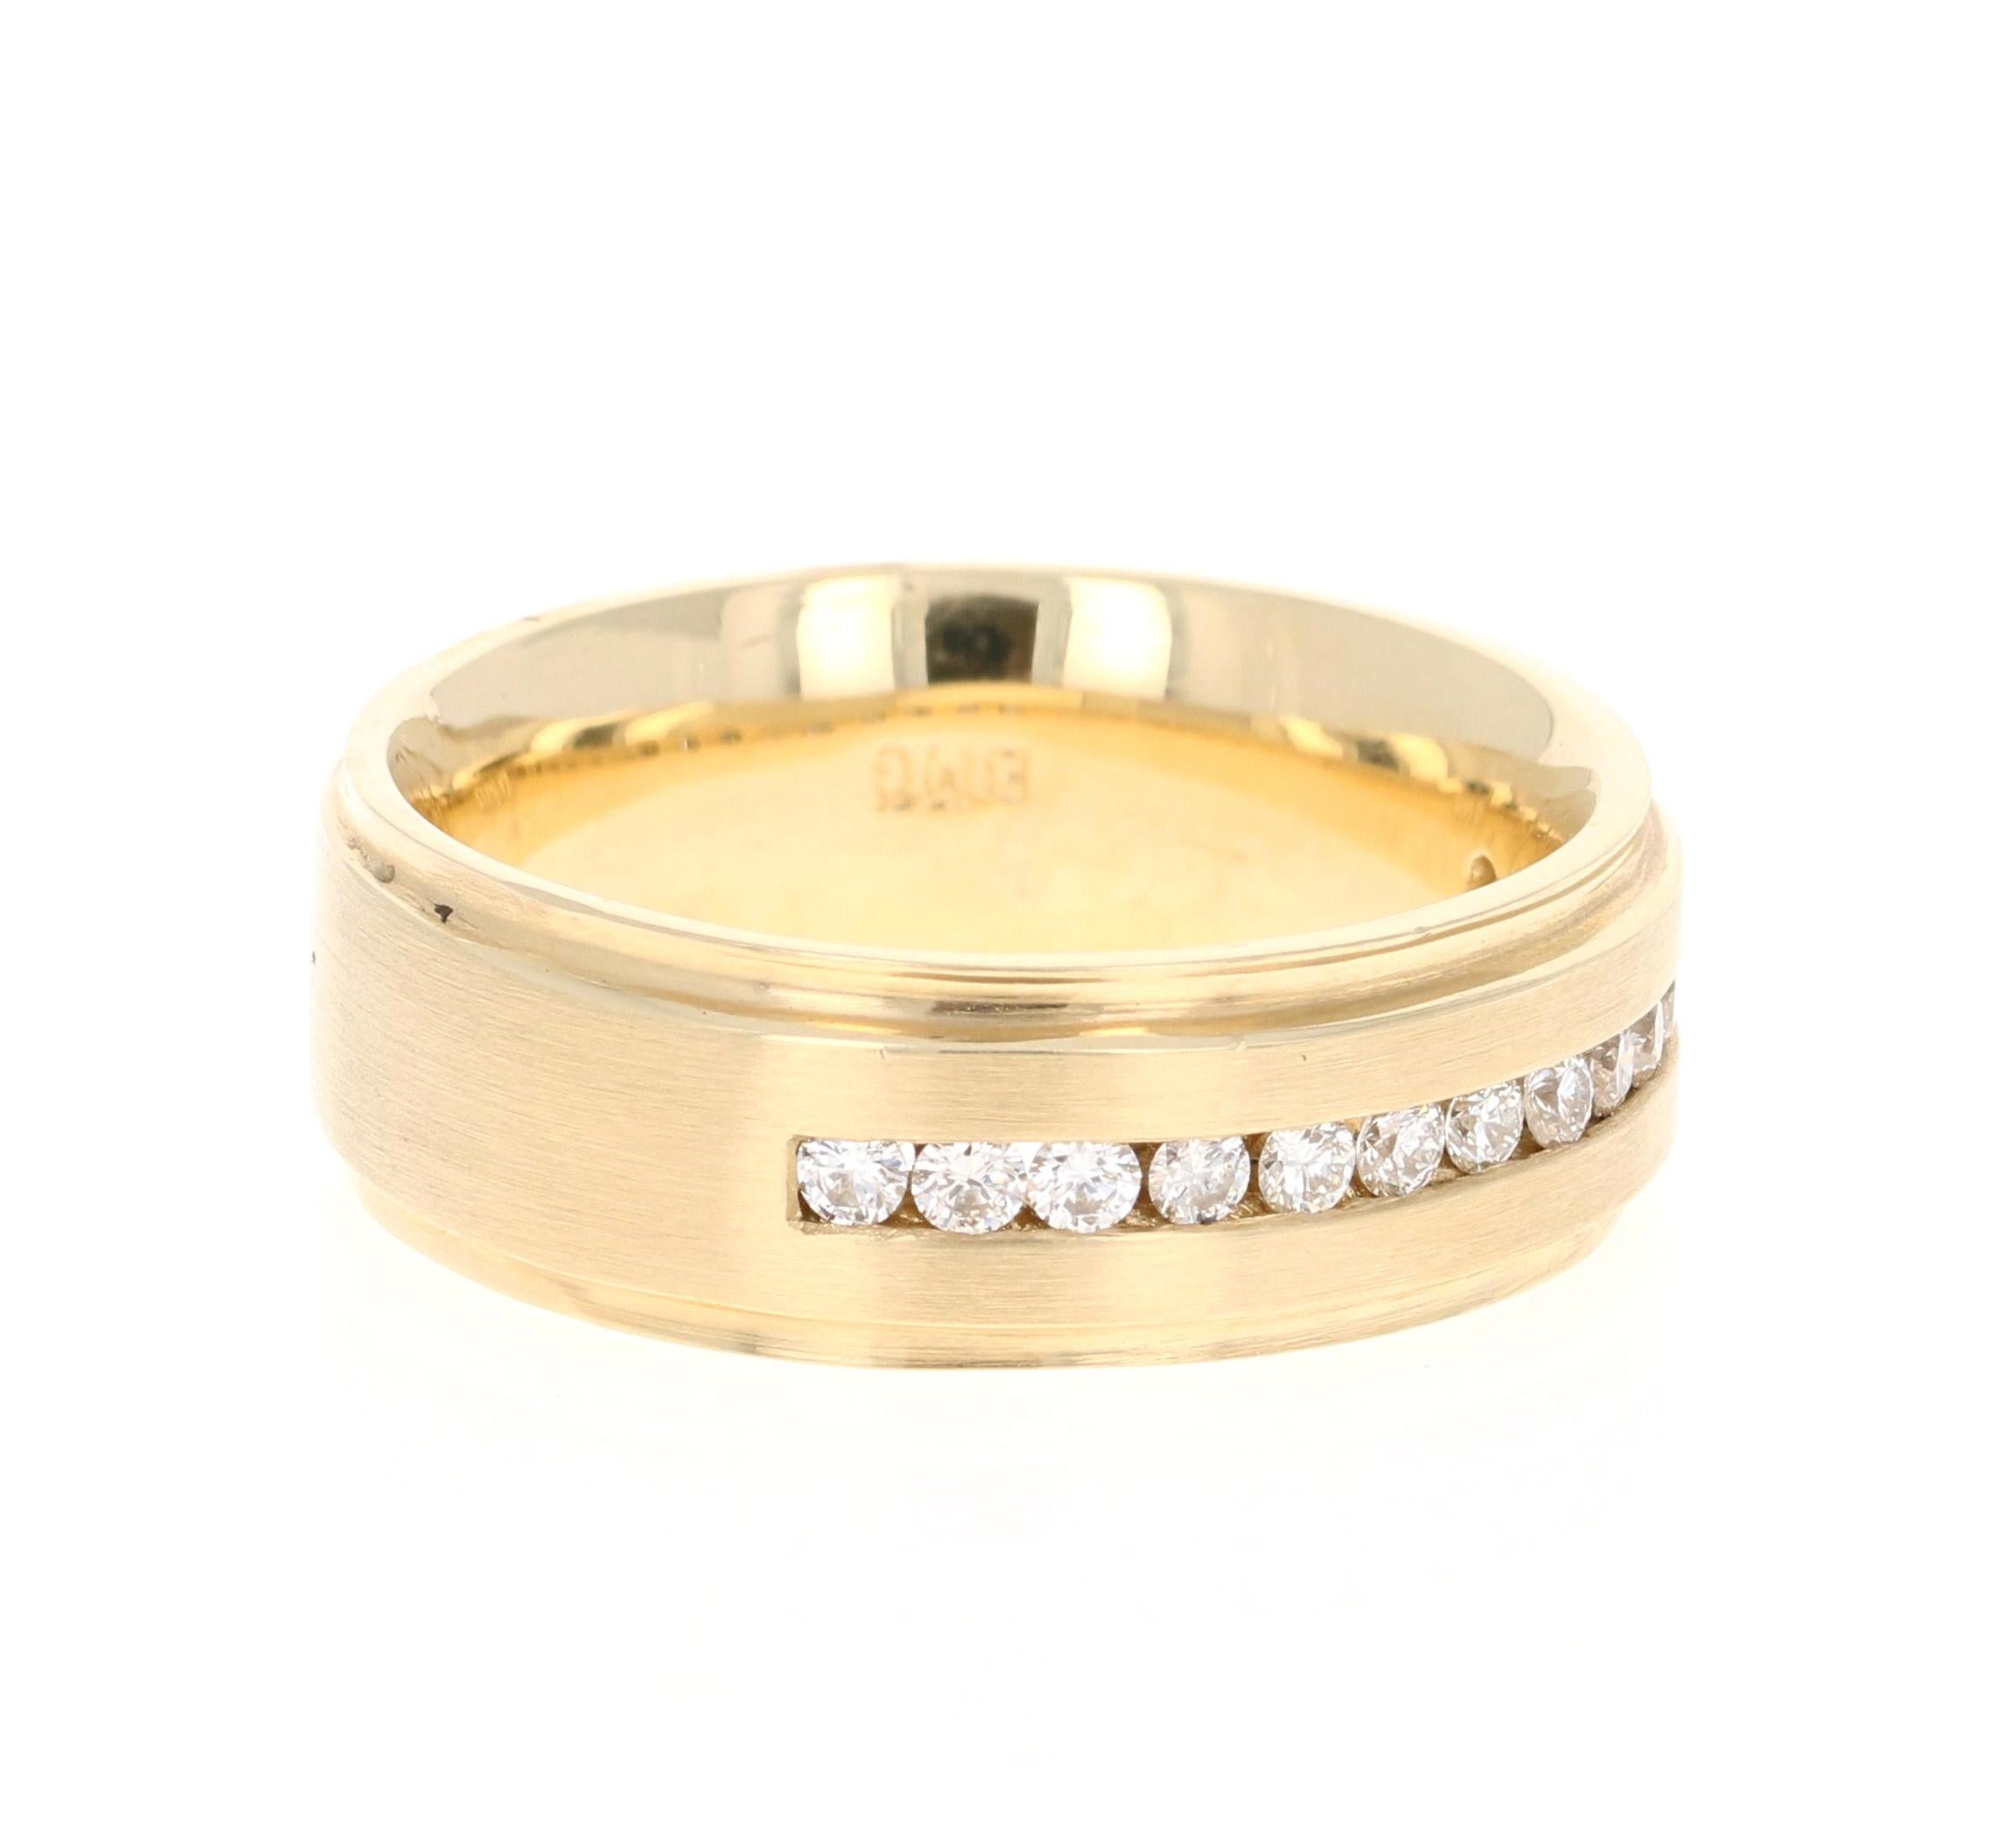 We have a Men's Collection of Fine Jewelry! Beautiful, Bold, Masculine and Simple Men's Wedding Rings/Bands. 

This Men's Band has 14 Round Cut Diamonds that weigh 0.48 Carats. It is crafted in 14 Karat Yellow Gold and weighs approximately 14.2